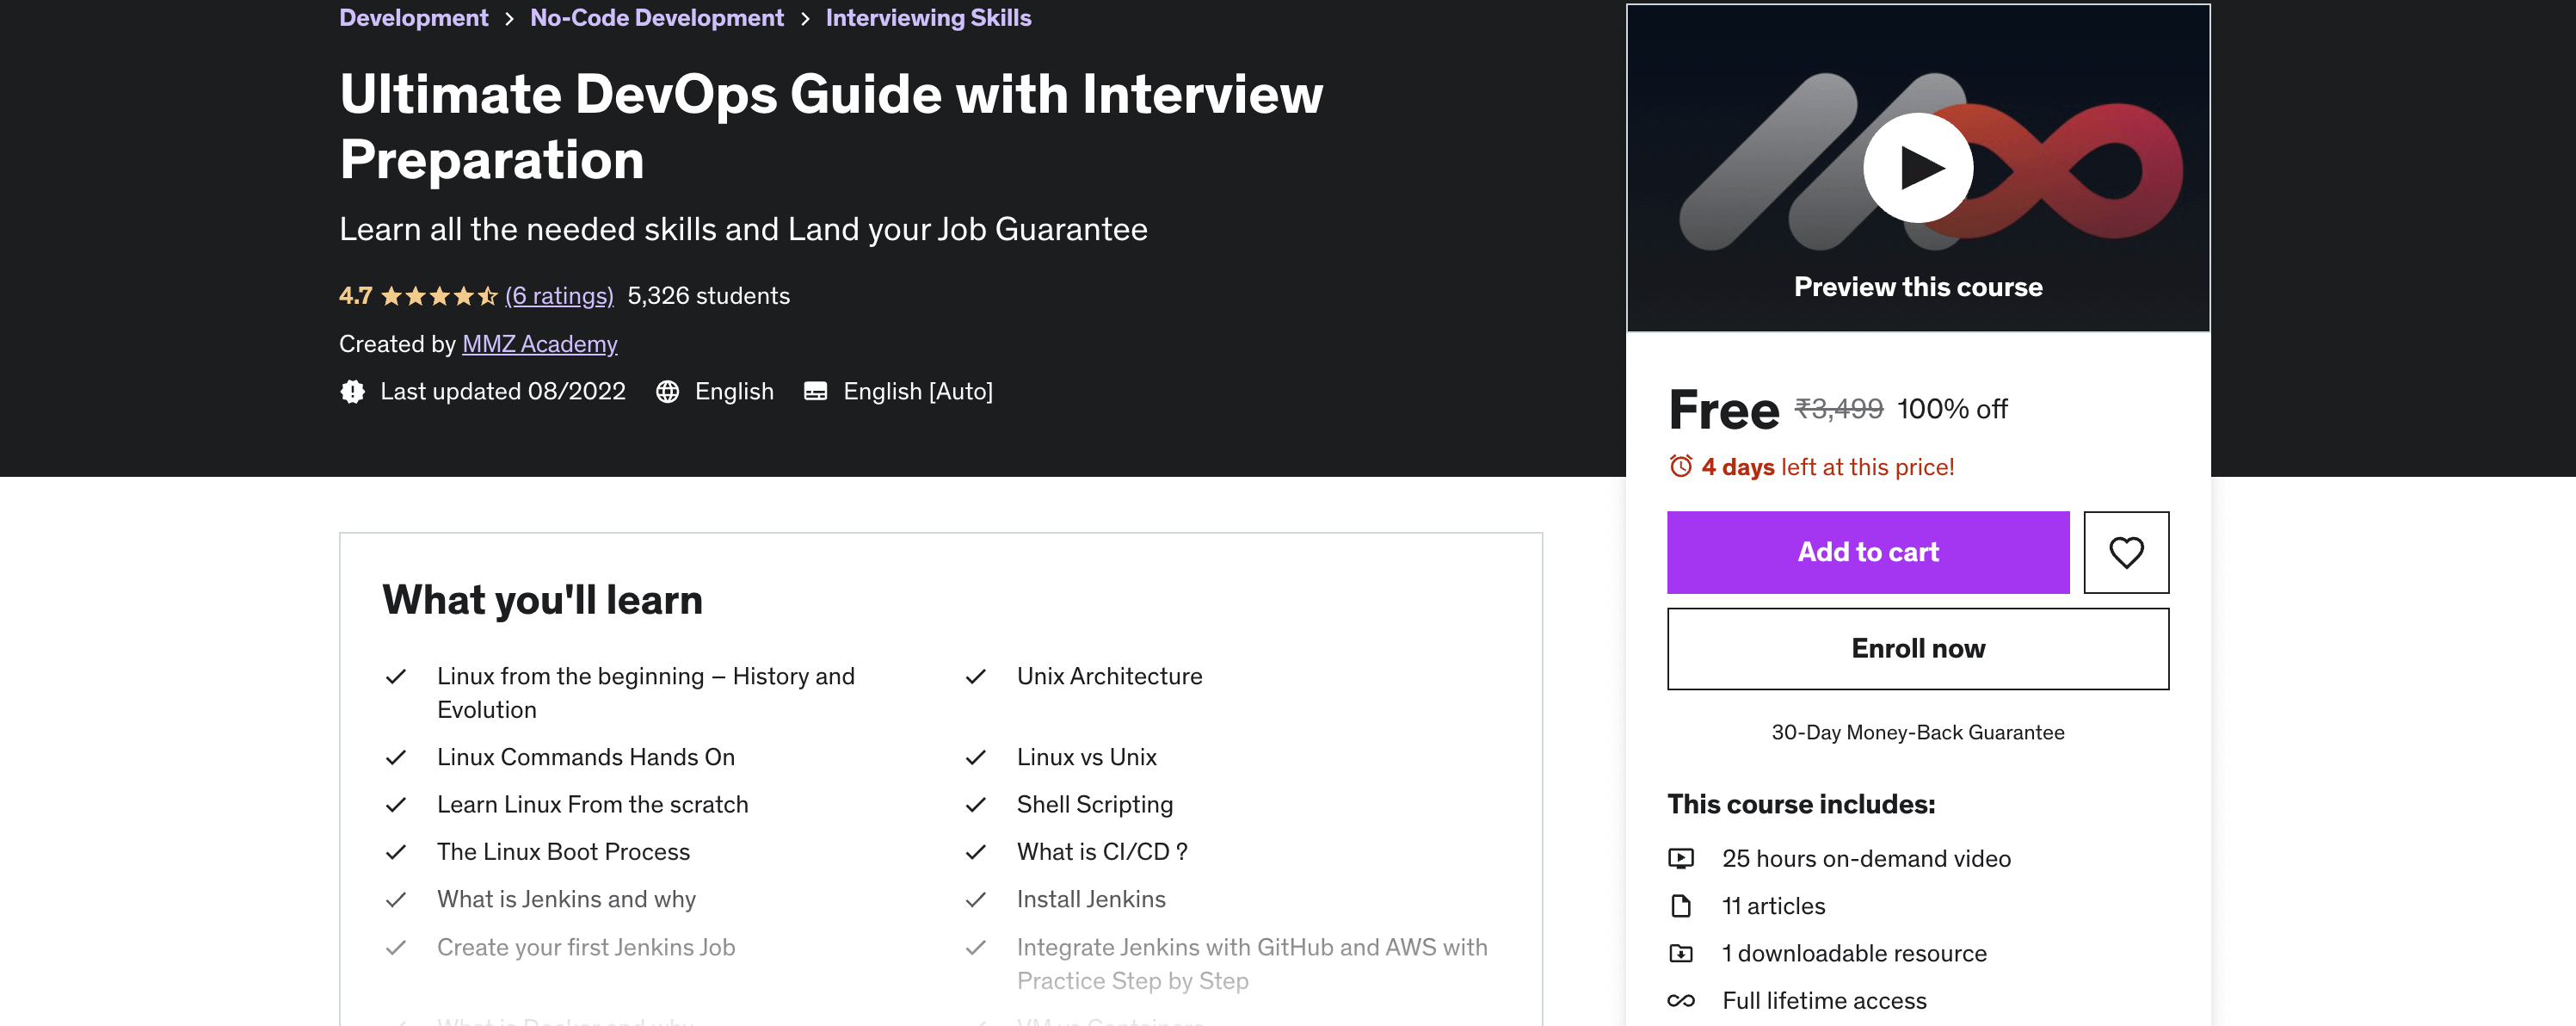 Ultimate DevOps Guide with Interview Preparation